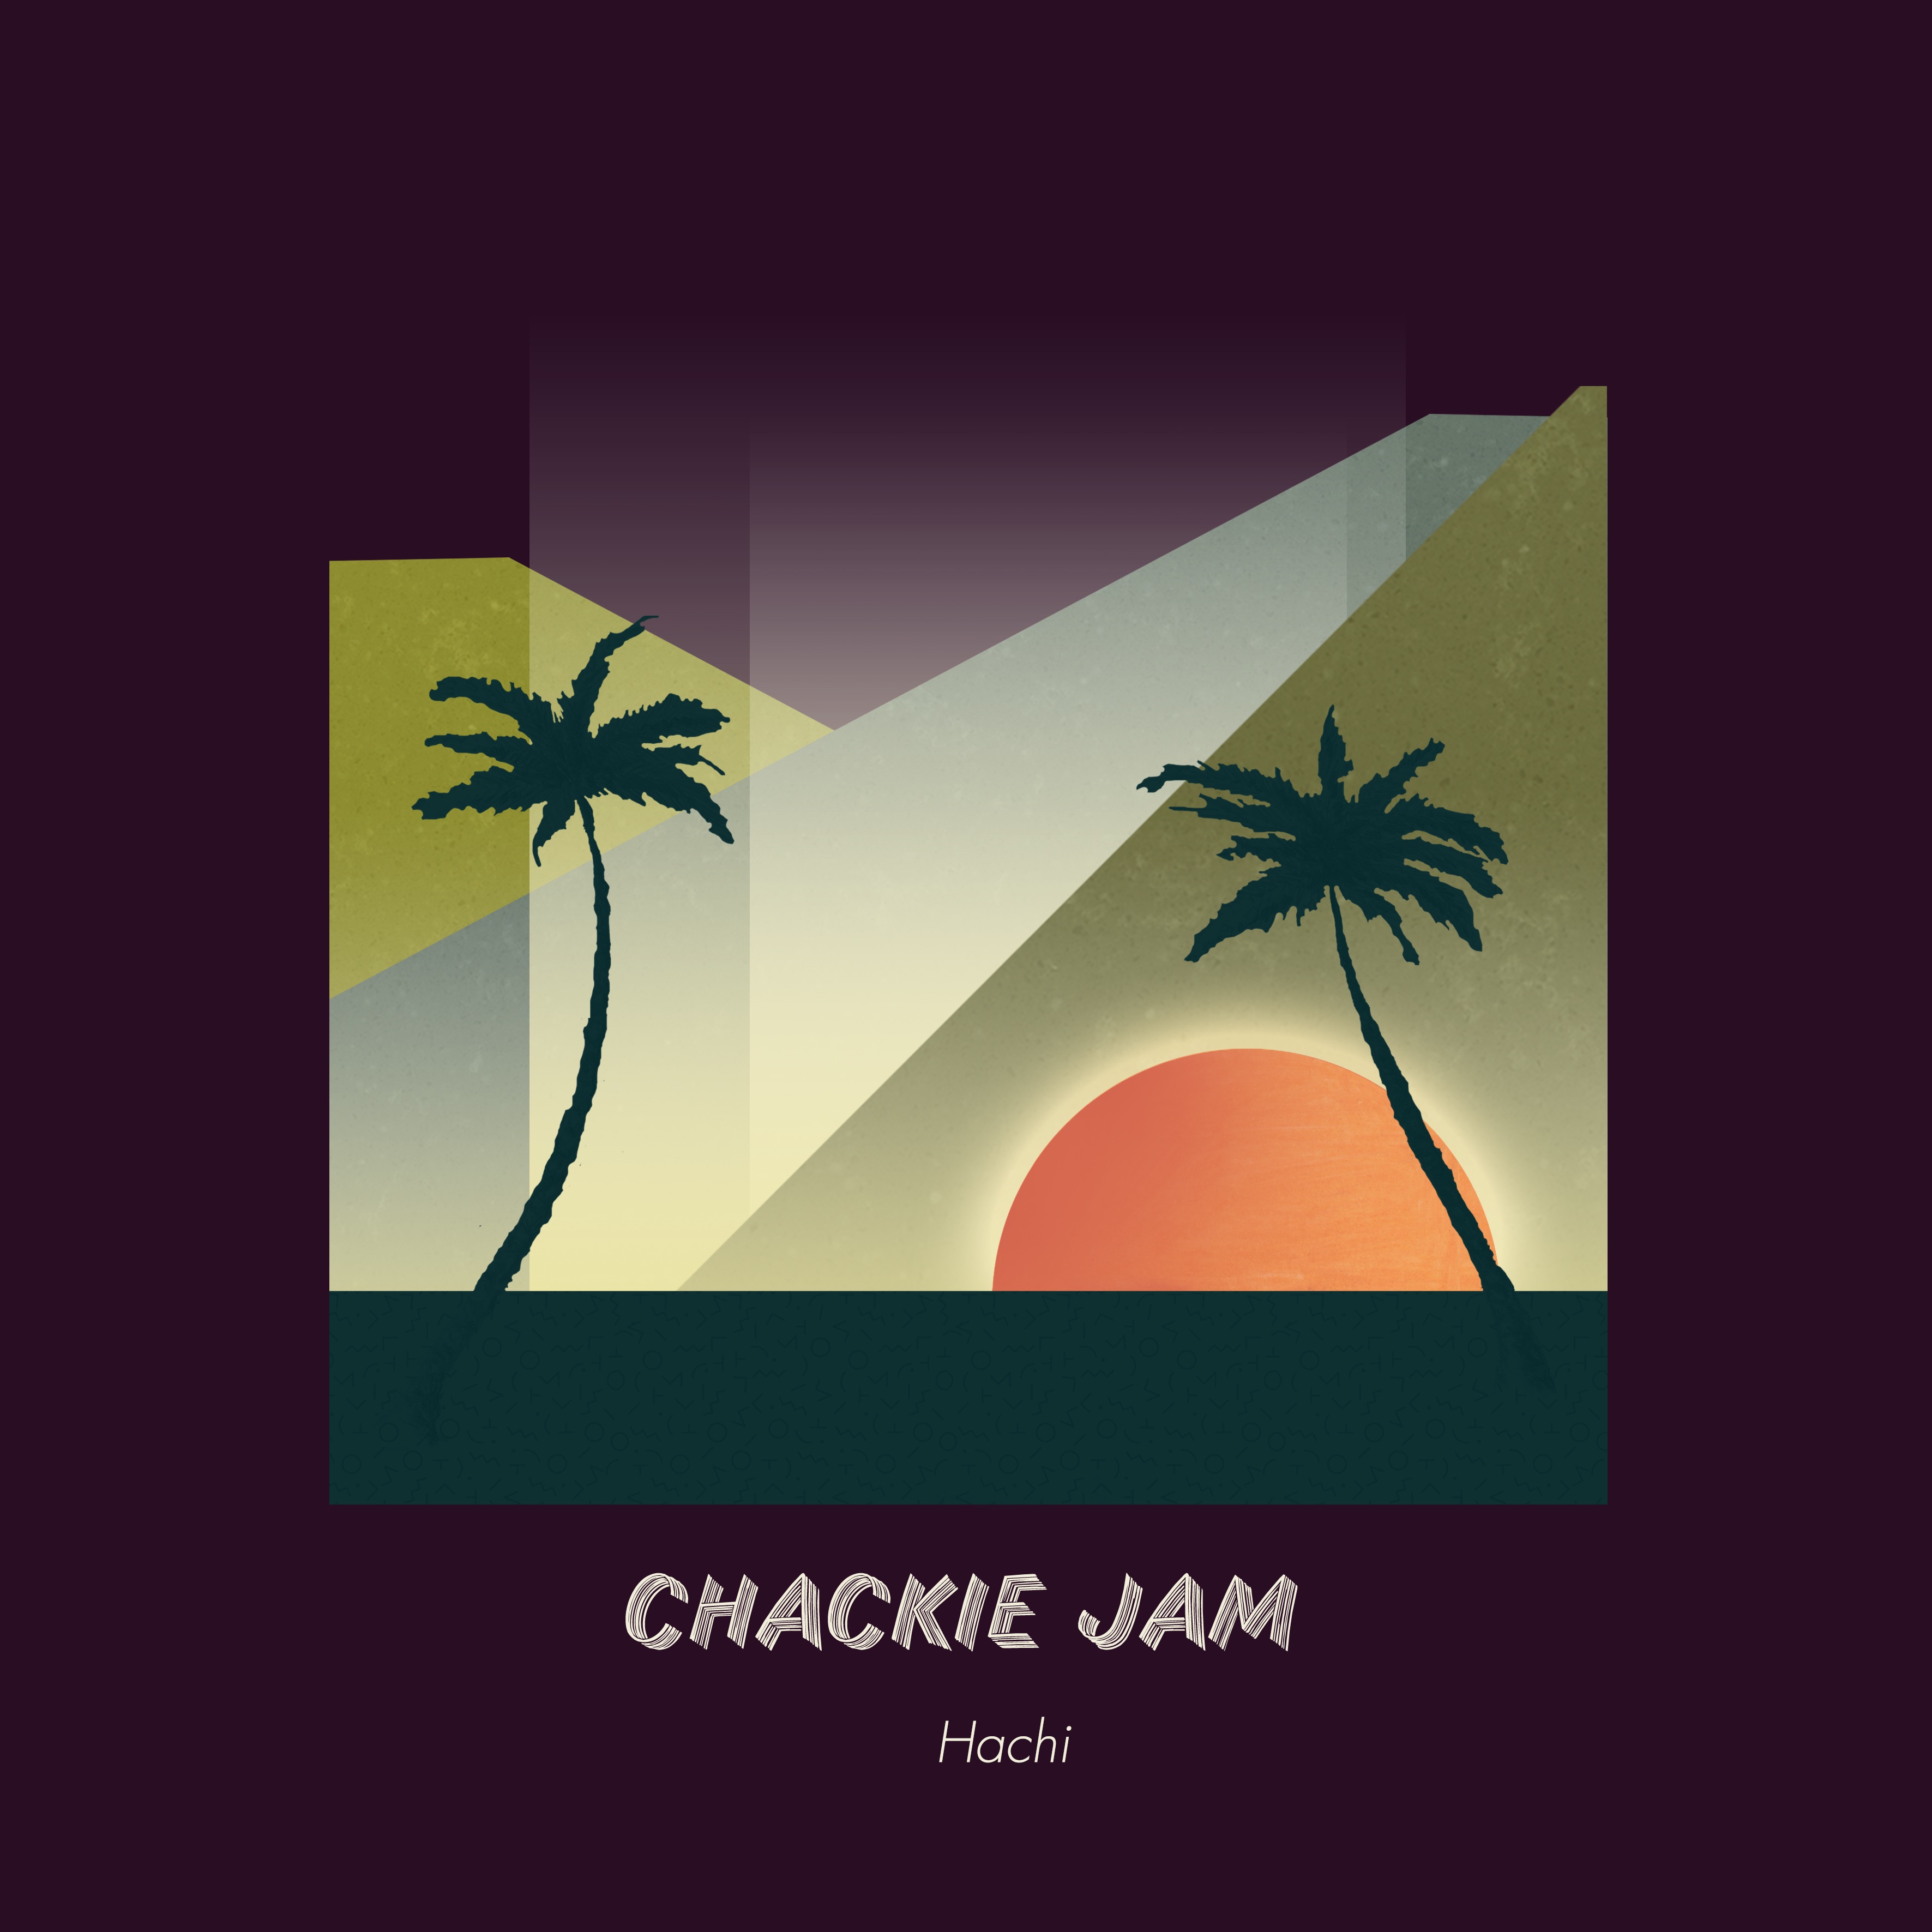 Chackie Jam – “Hachi”